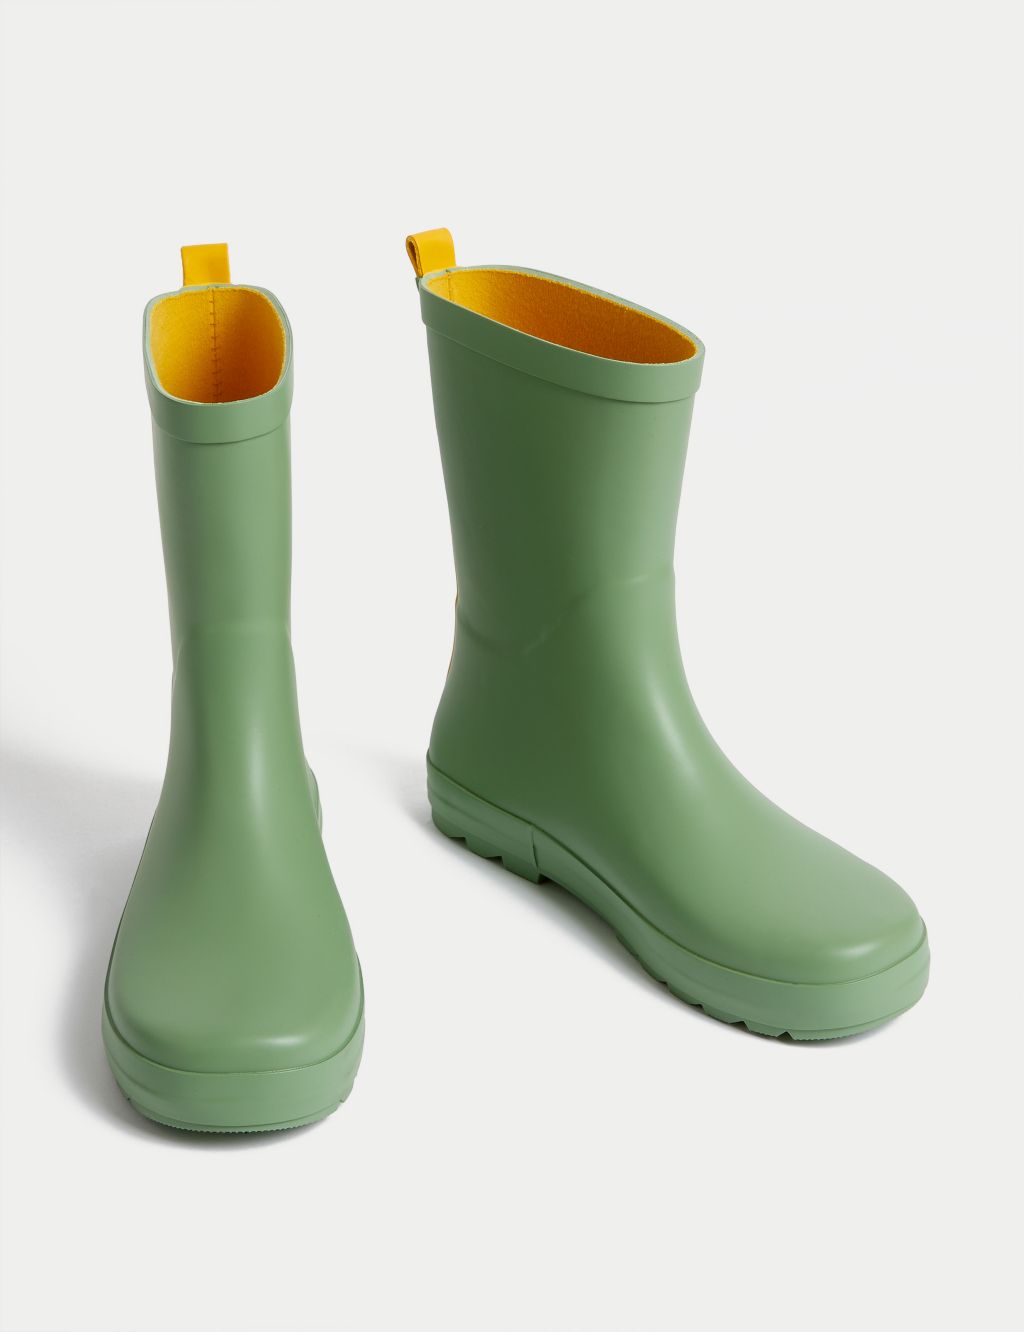 Kids' Wellies (4 Small - 7 Large) image 2